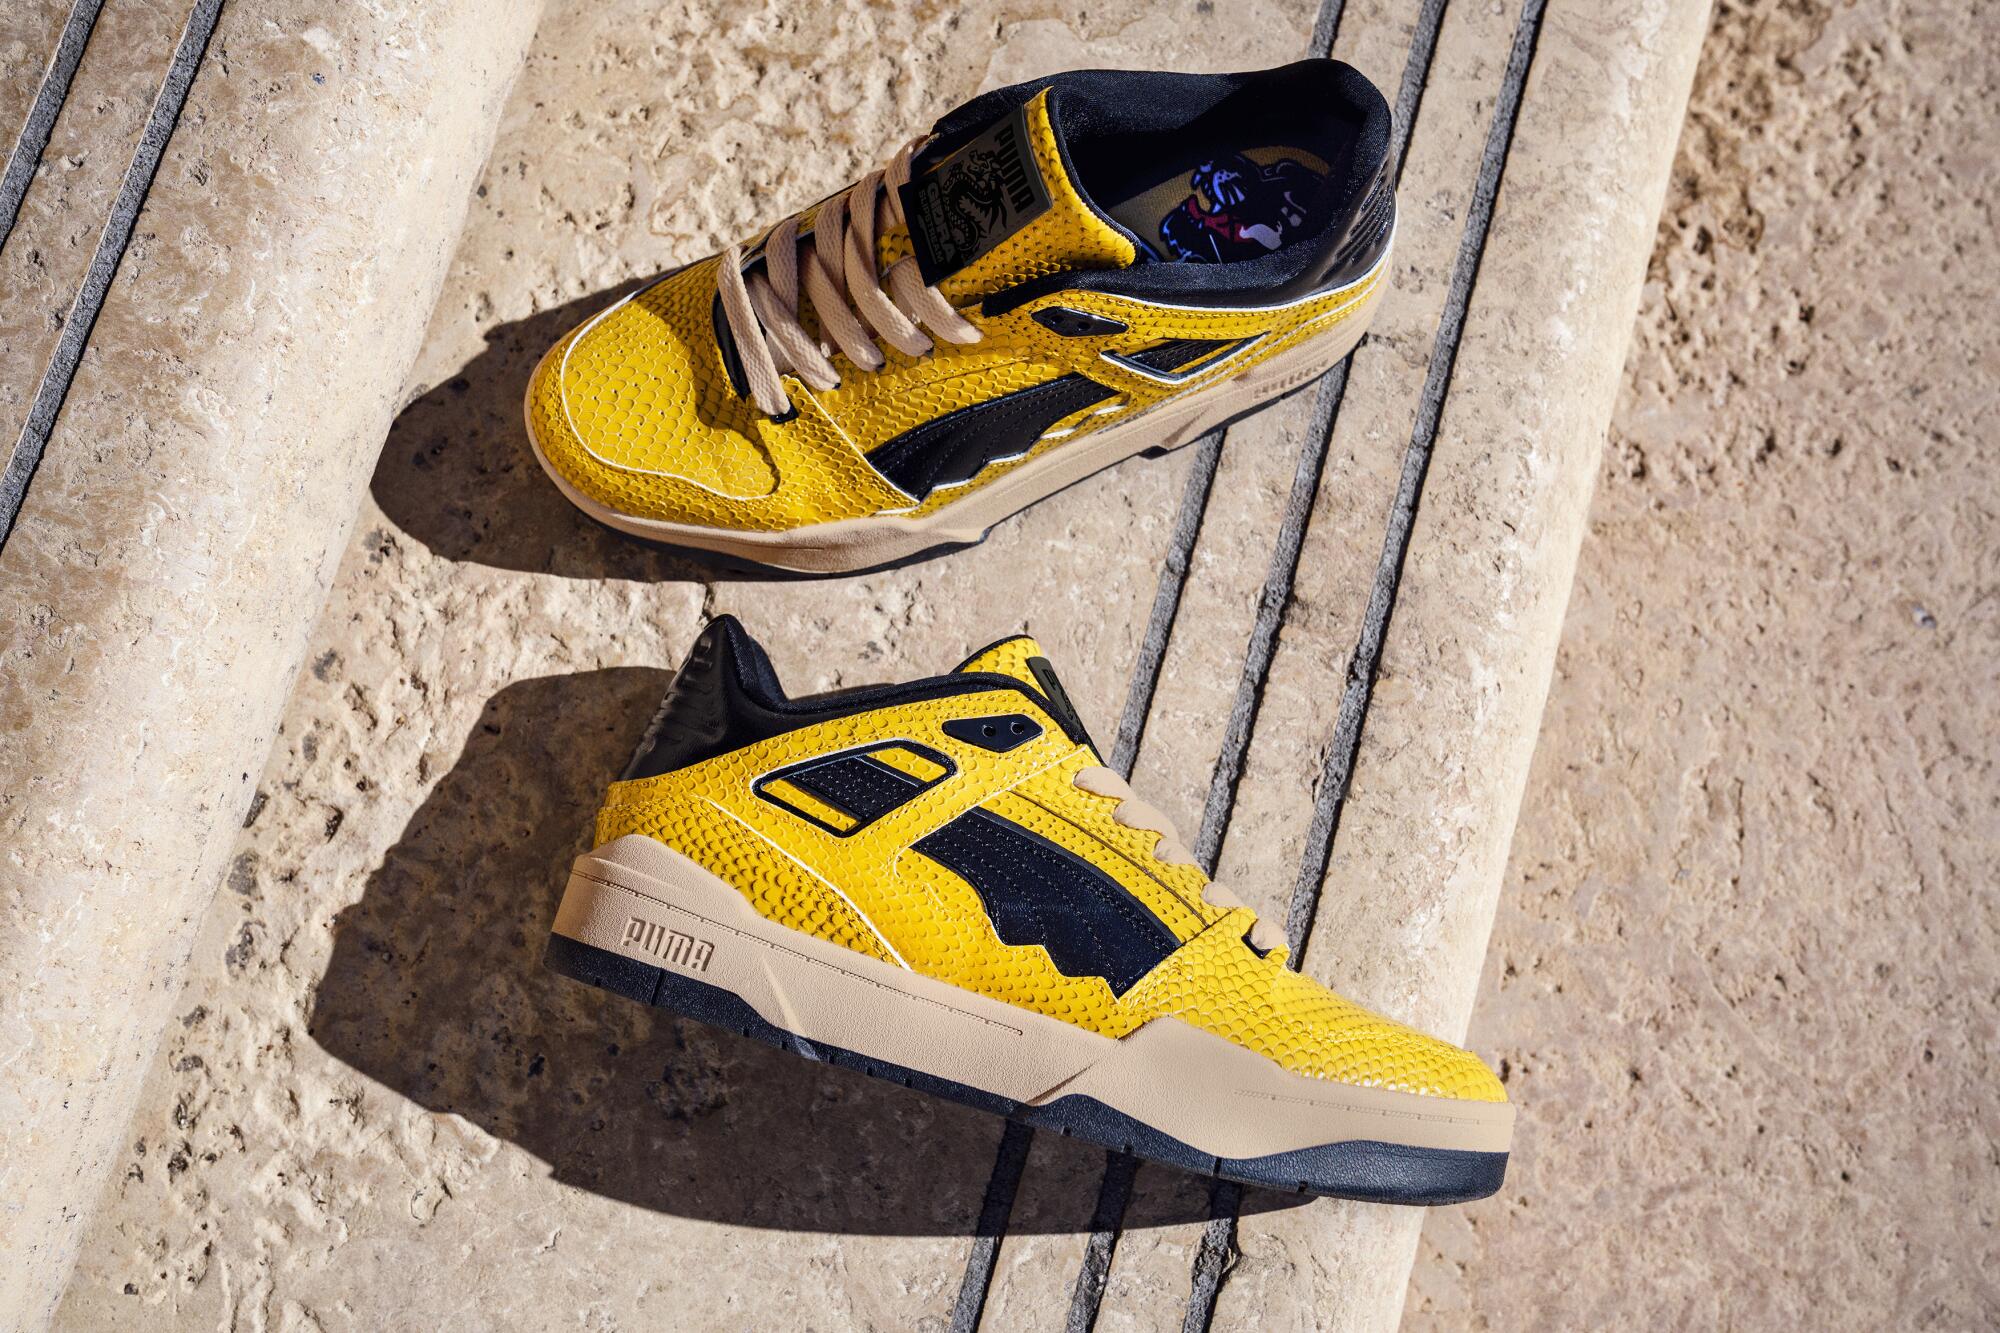 Photo of yellow sneakers from PUMA x STAPLE 'Gidra' collection.